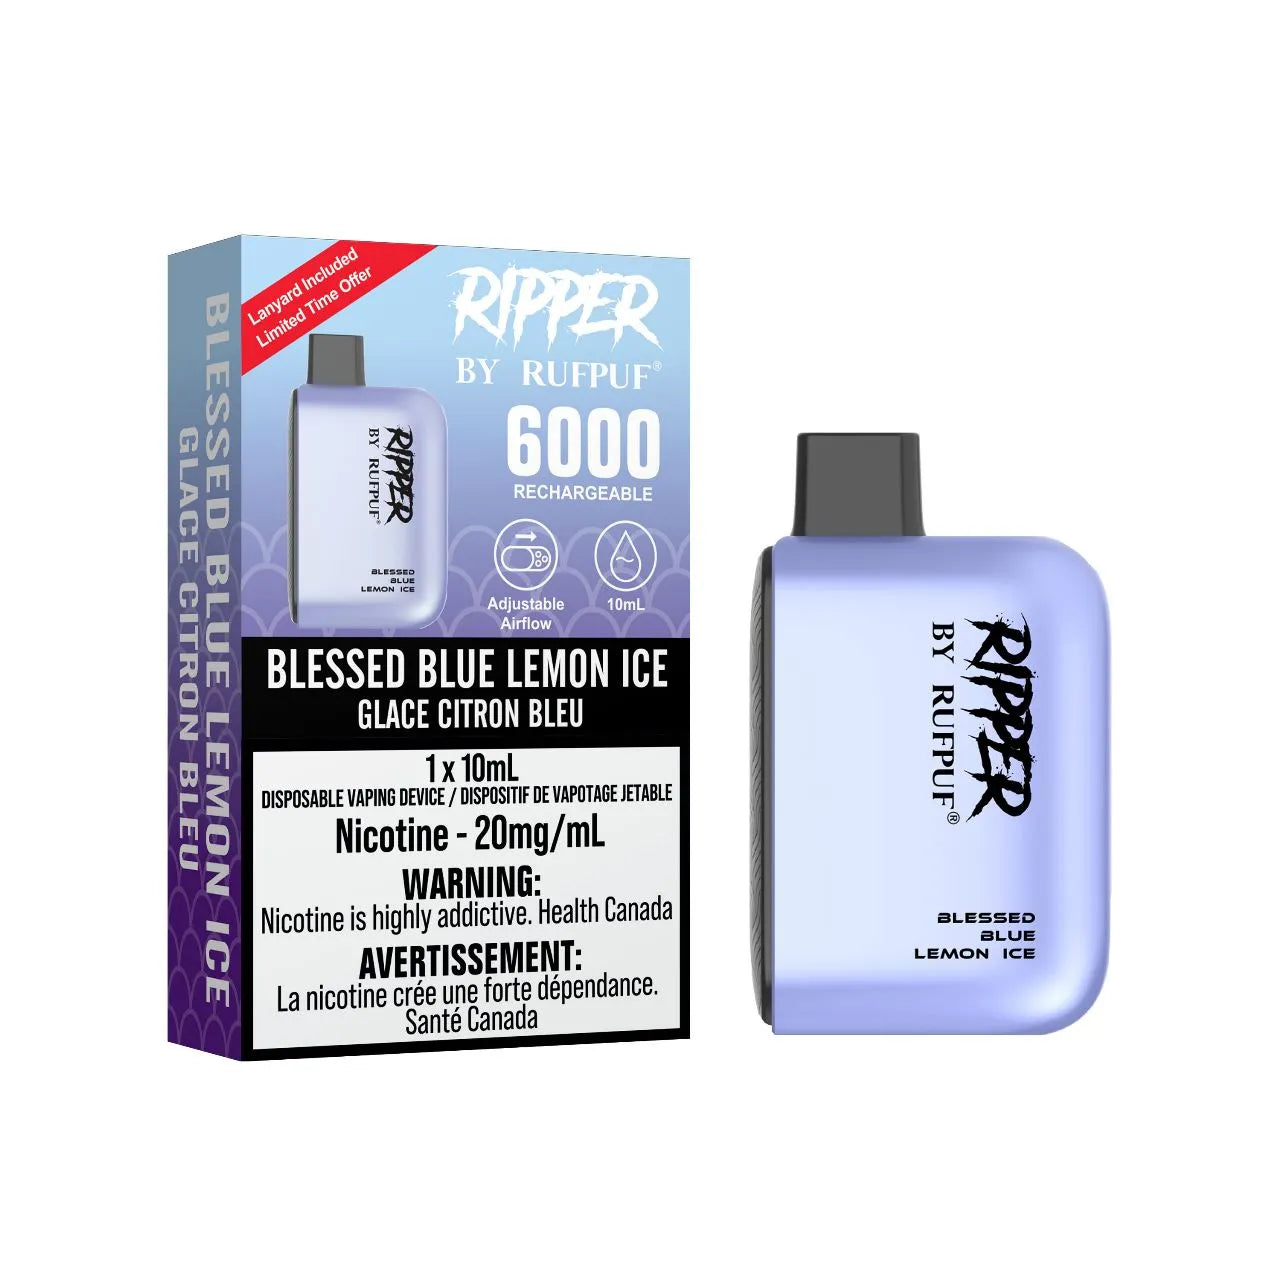 Rufpuf Ripper Blessed Blue Lemon Ice Disposable Vape - Online Vape Shop Canada - Quebec and BC Shipping Available